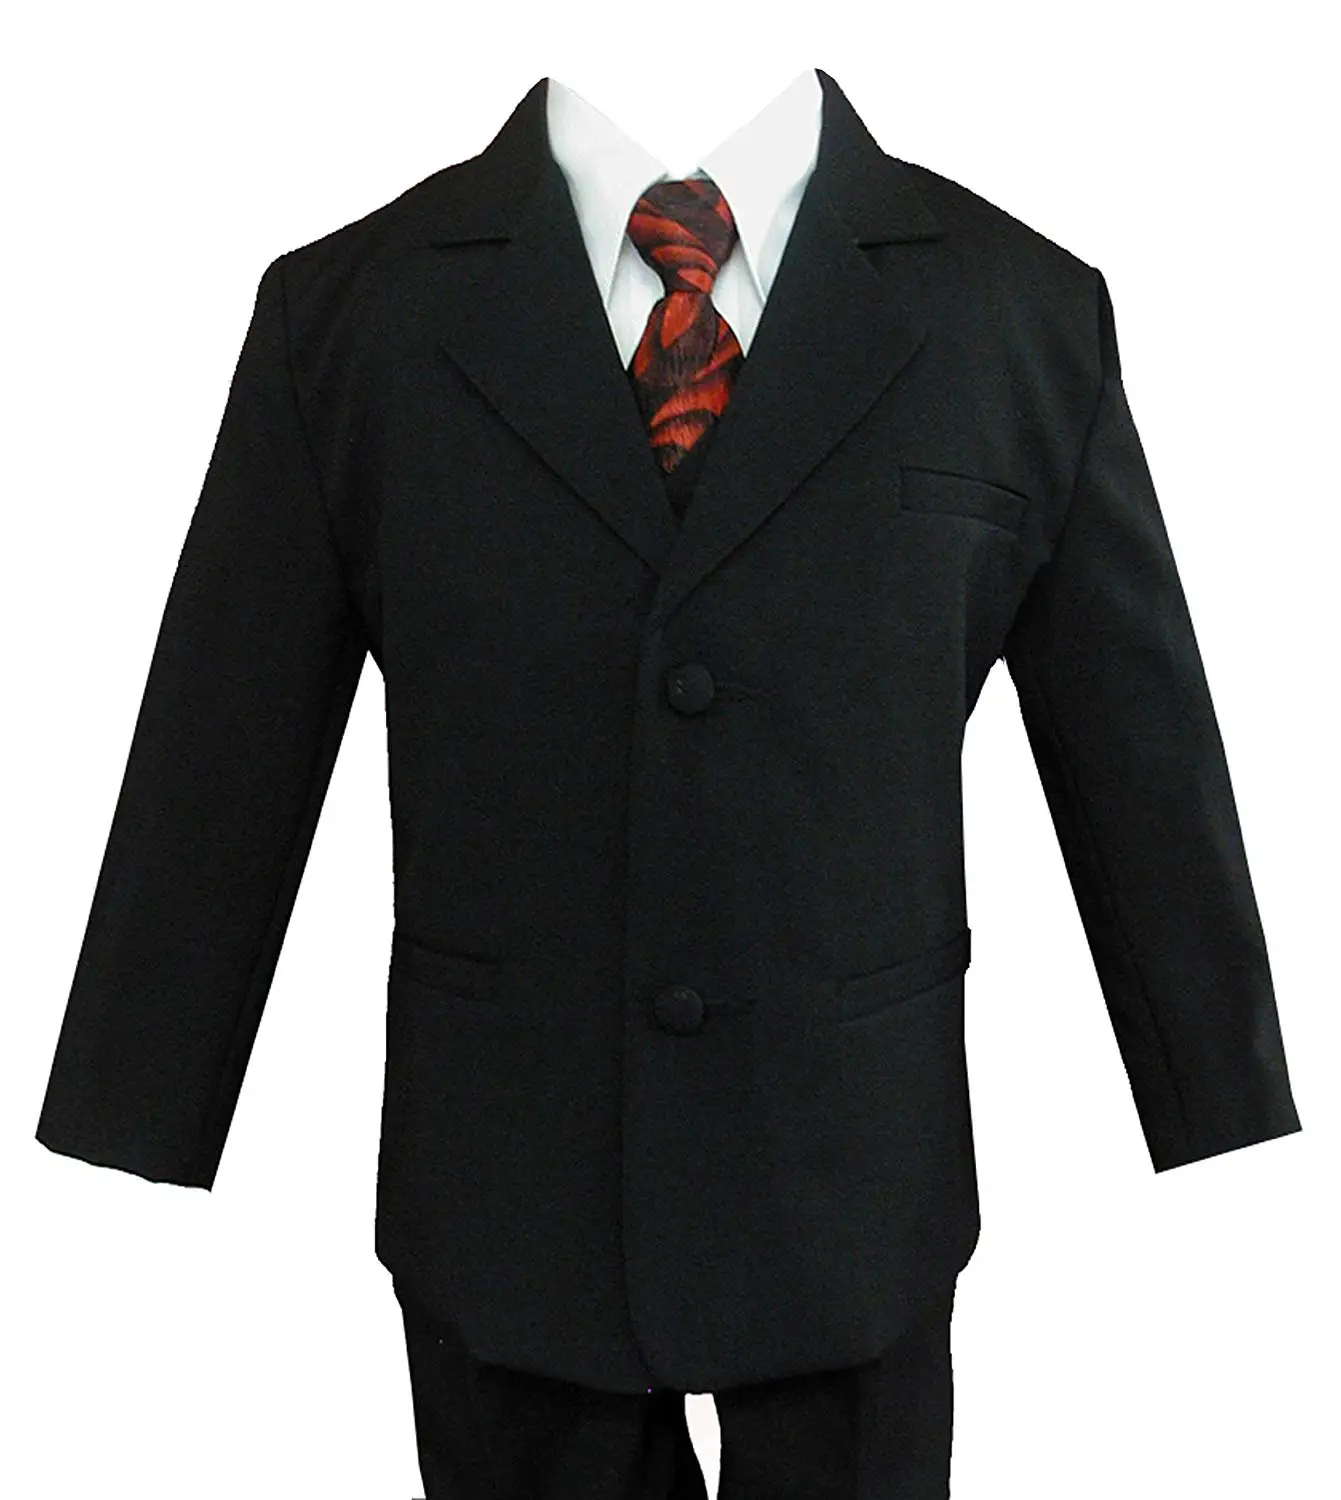 Gino Giovanni Boys Black Long Tie From Baby to Teen